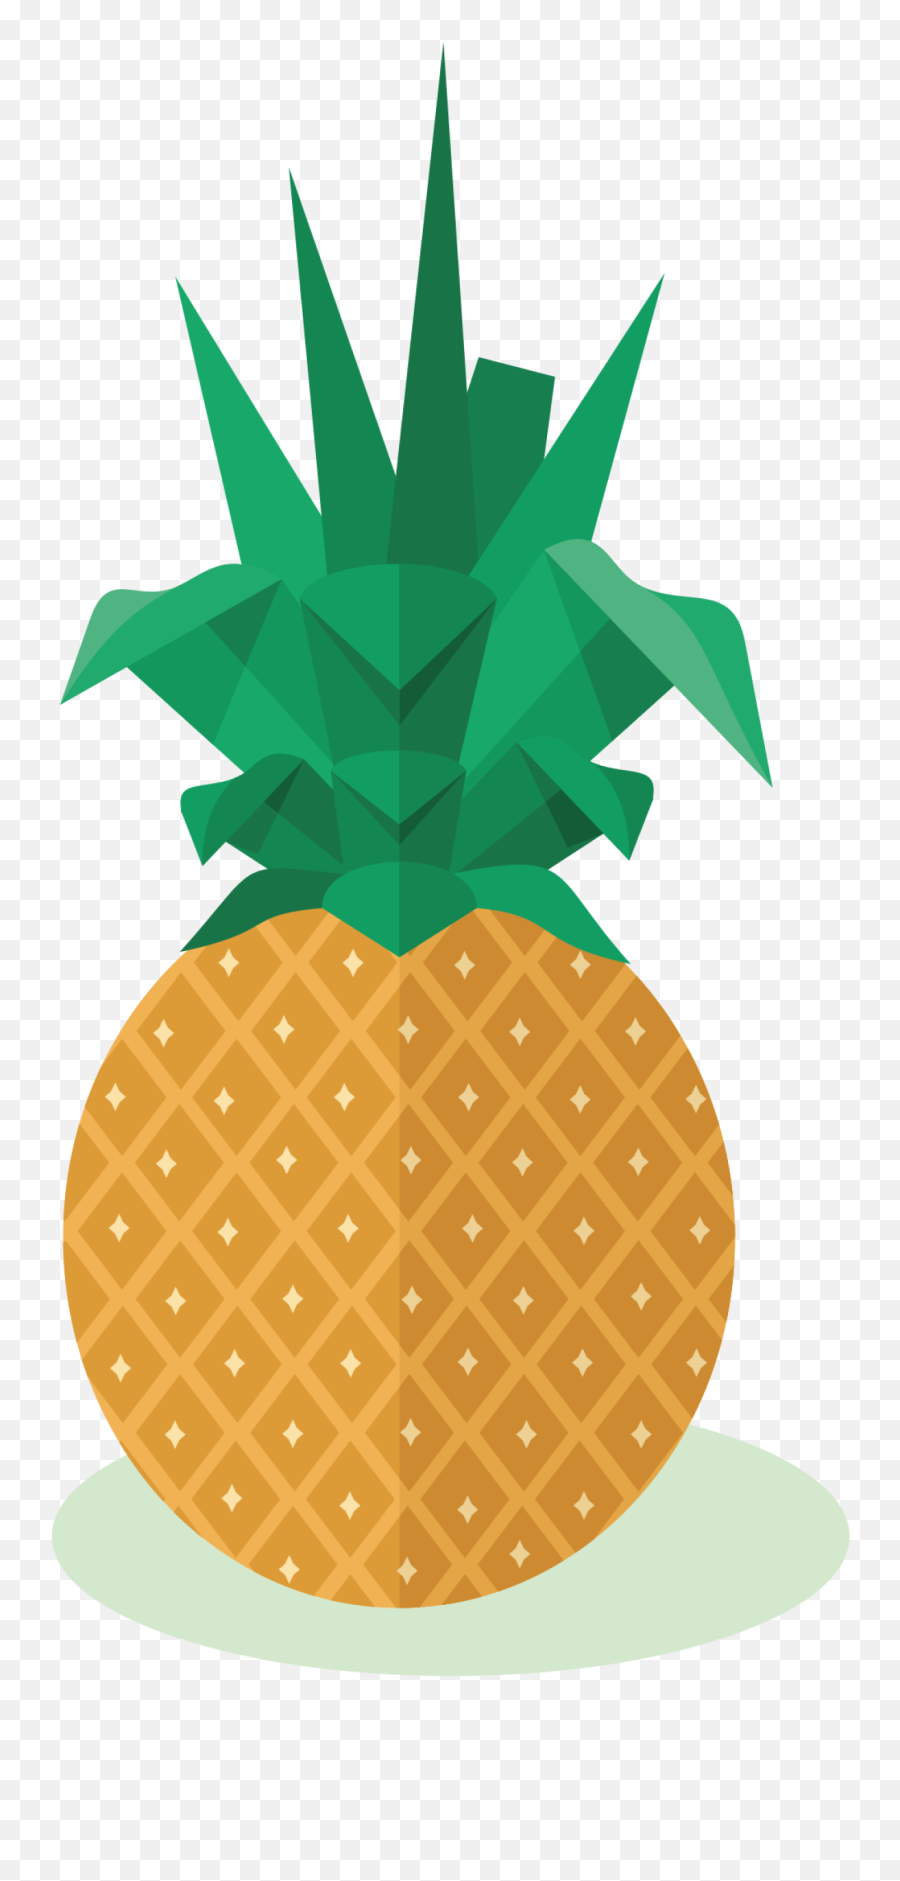 Pineapple Clipart Png In This 1 Piece Pineapple Svg Clipart - Pineapple Emoji,Pineapple Clipart